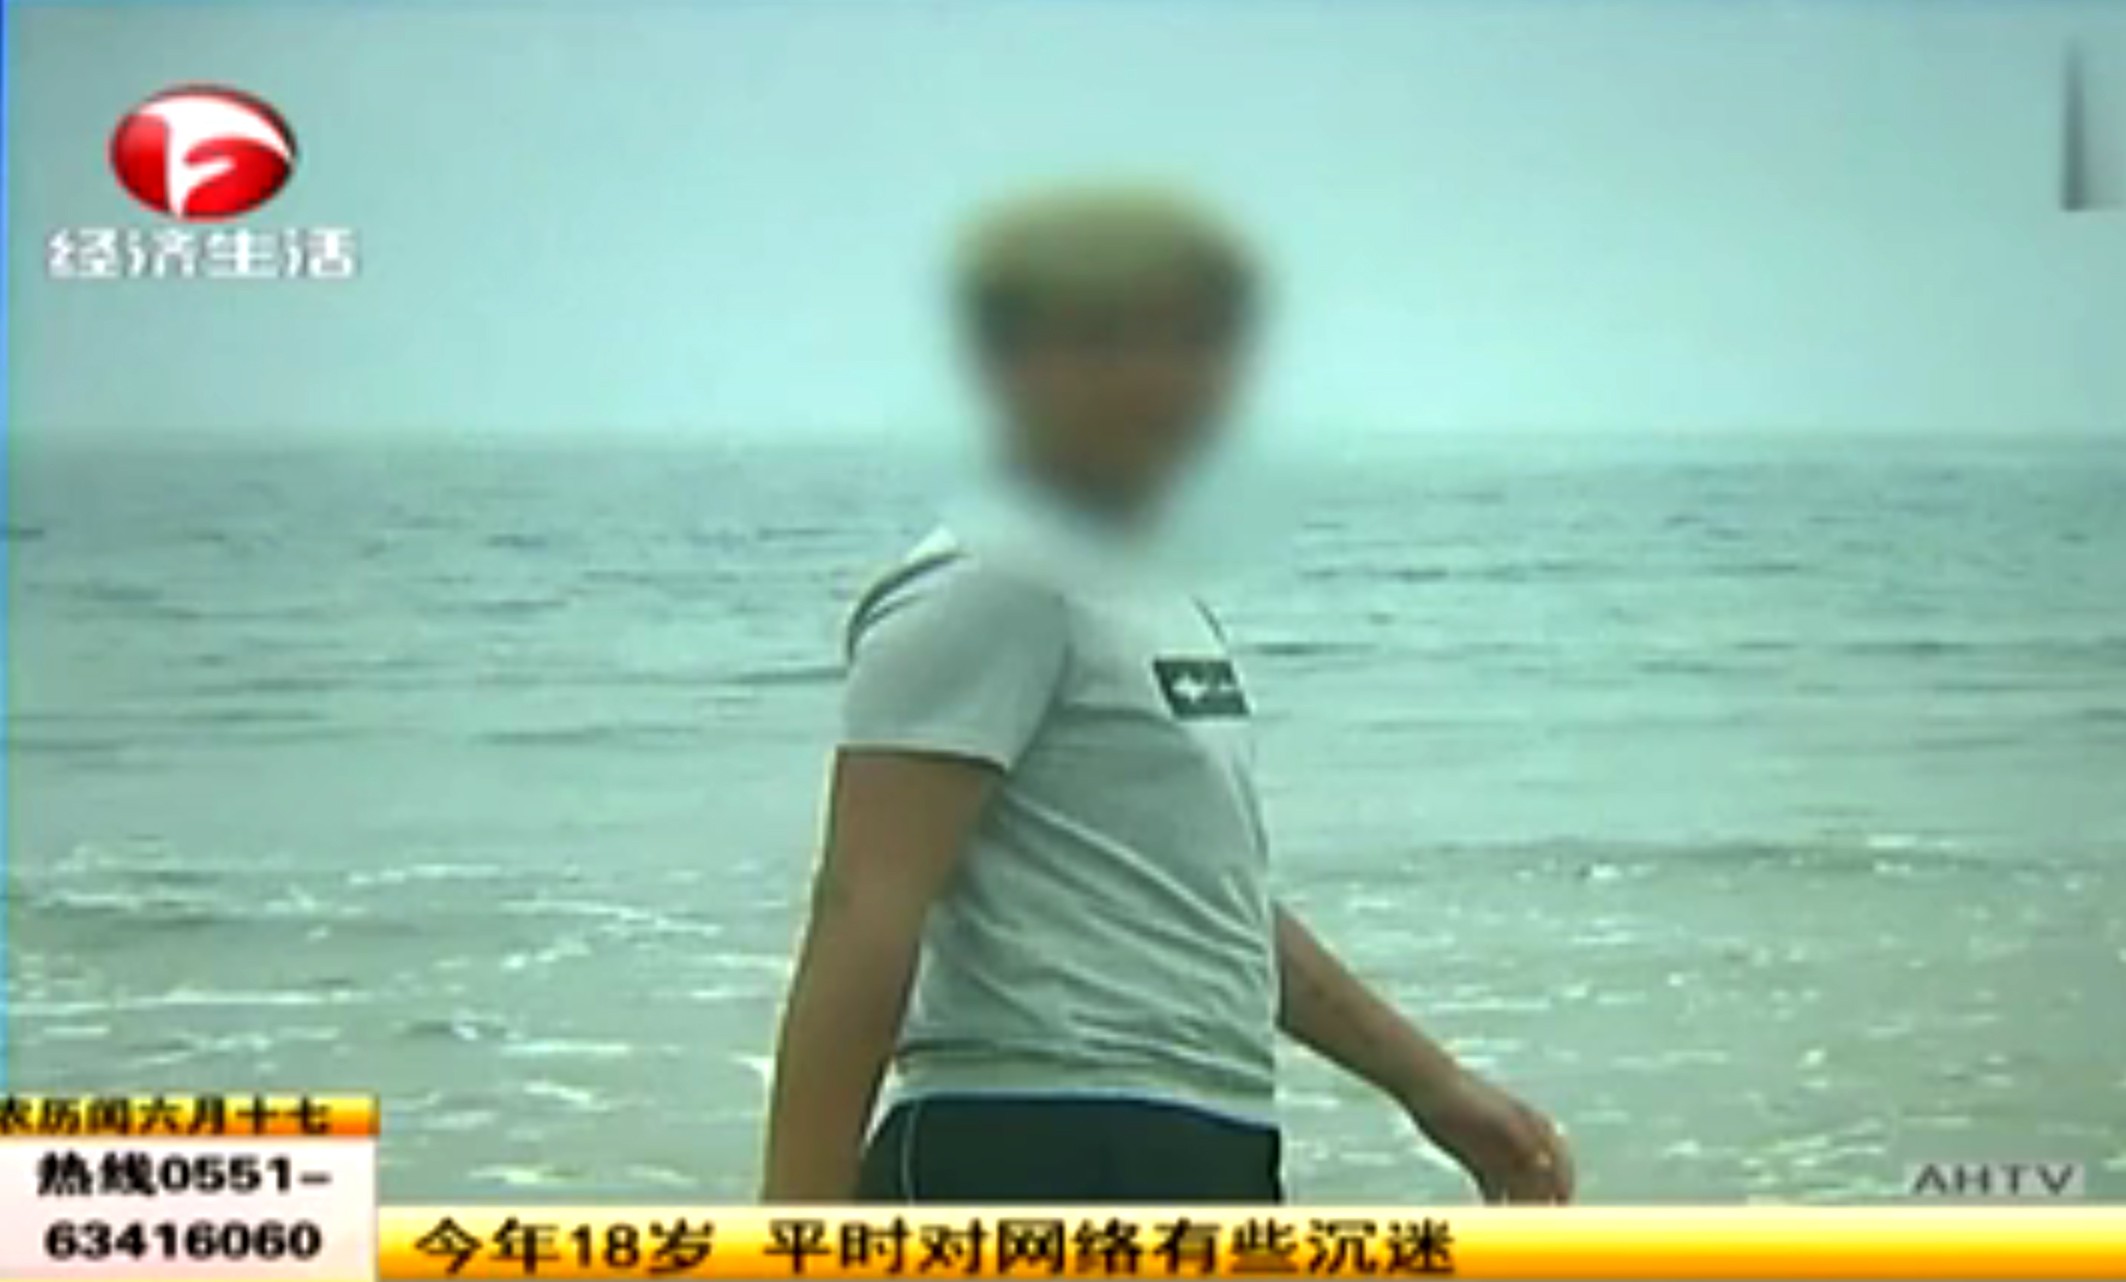 The teenager, named as Li Ao, died two days after being sent to the centre. Photo: Handout